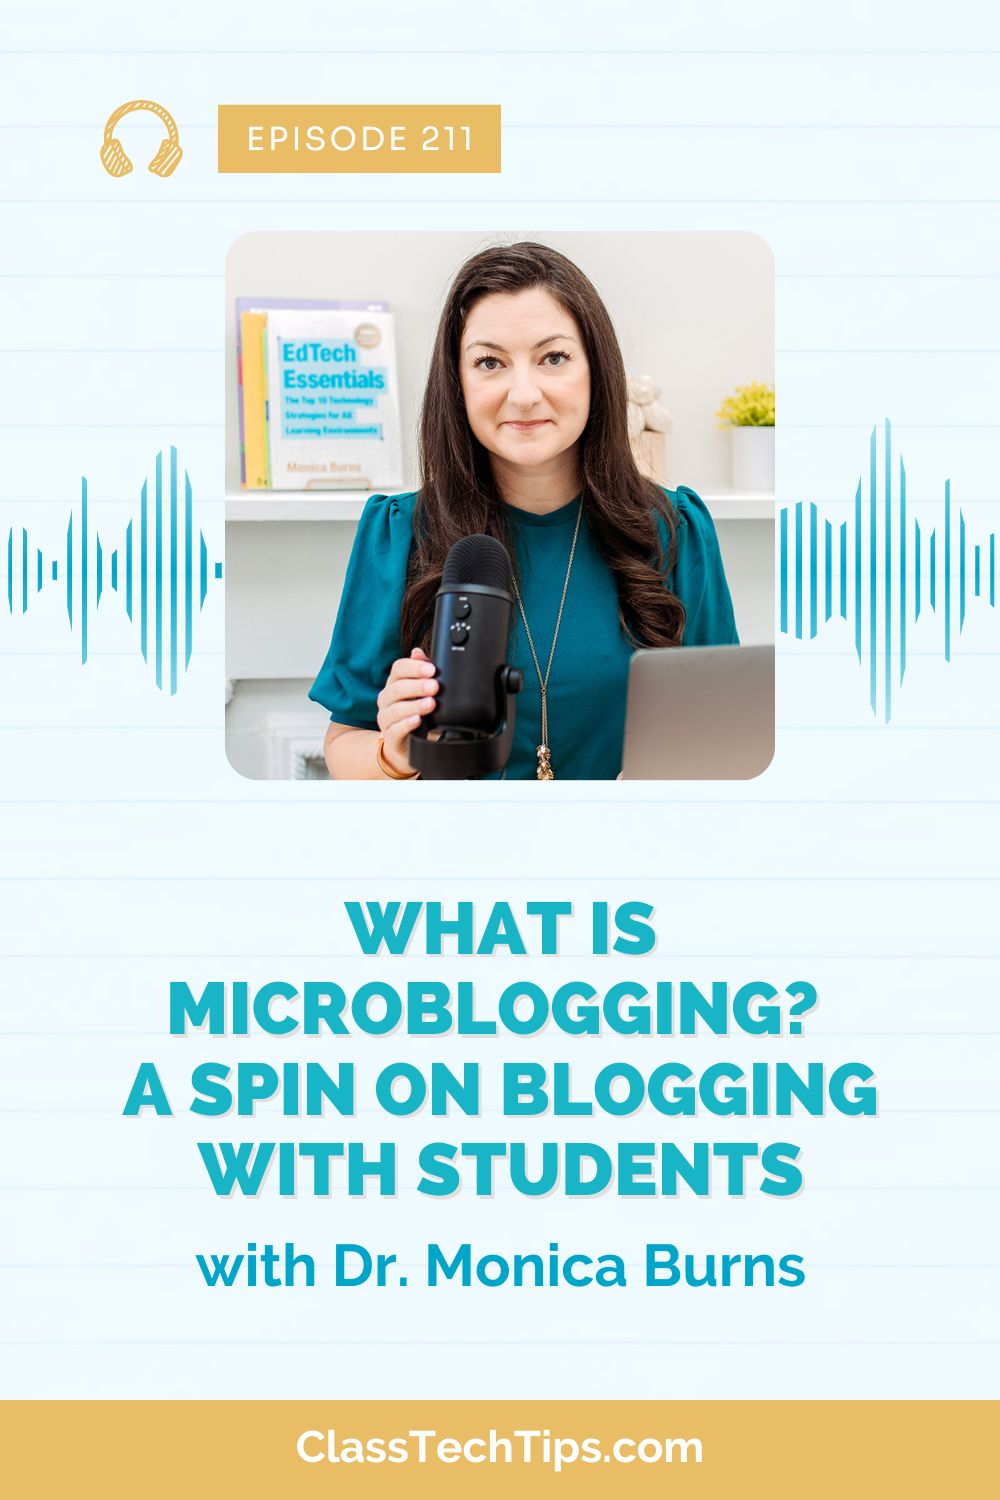 An image of a podcast logo and sound bar with the title of the episode, "What is Microblogging?" The image represents a podcast episode that explores microblogging and how to integrate it into classroom activities.